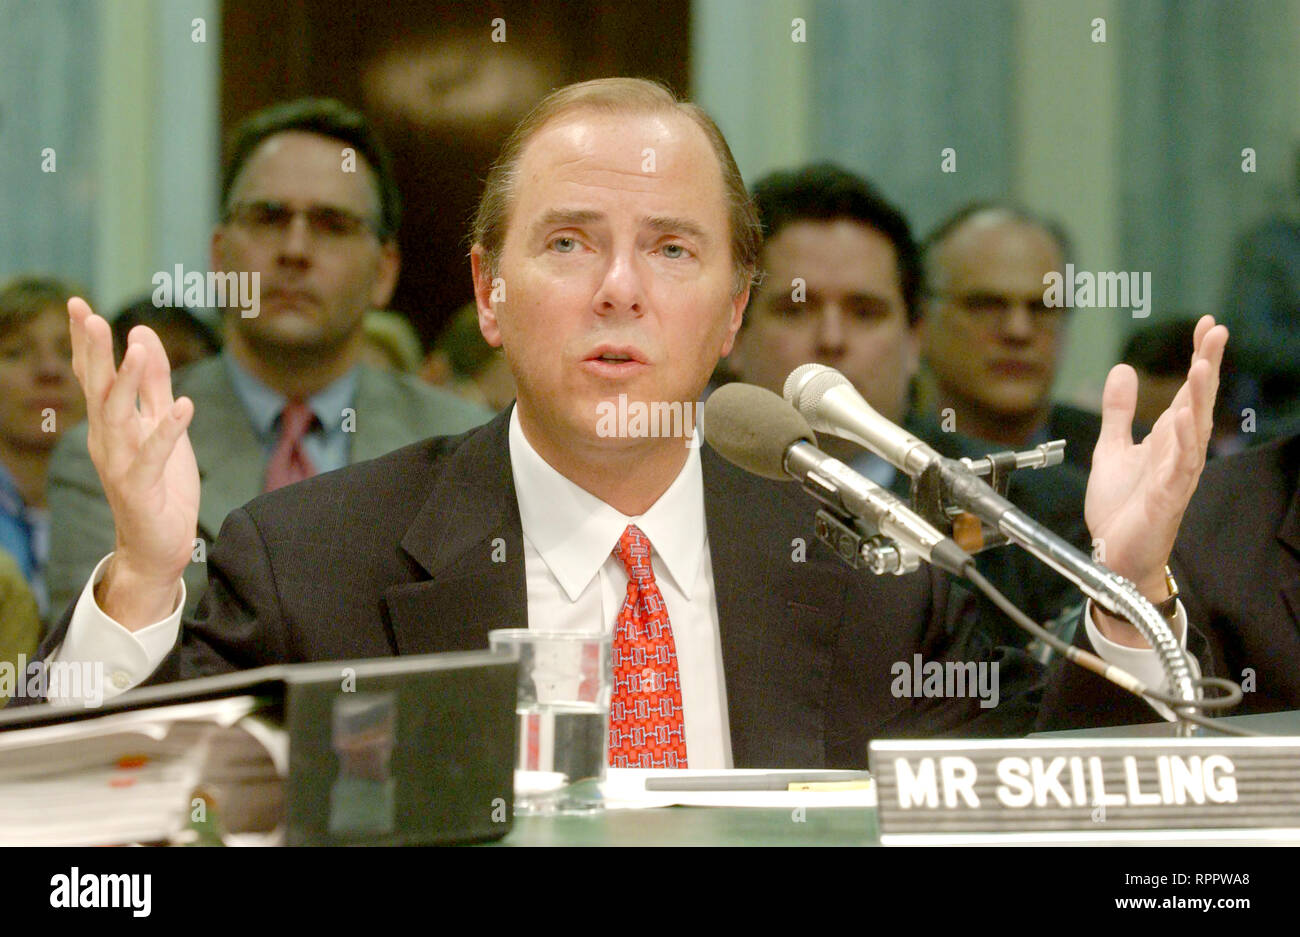 Washington, DC - February 26, 2002 -- Testimony of Jeffrey Skilling, former President and CEO, Enron Corporation, before the U.S. Senate Commerce, Science and Transportation Committee to examine certain issues with respect to the collapse of Enron Corporation.Credit: Ron Sachs/CNP | usage worldwide Stock Photo